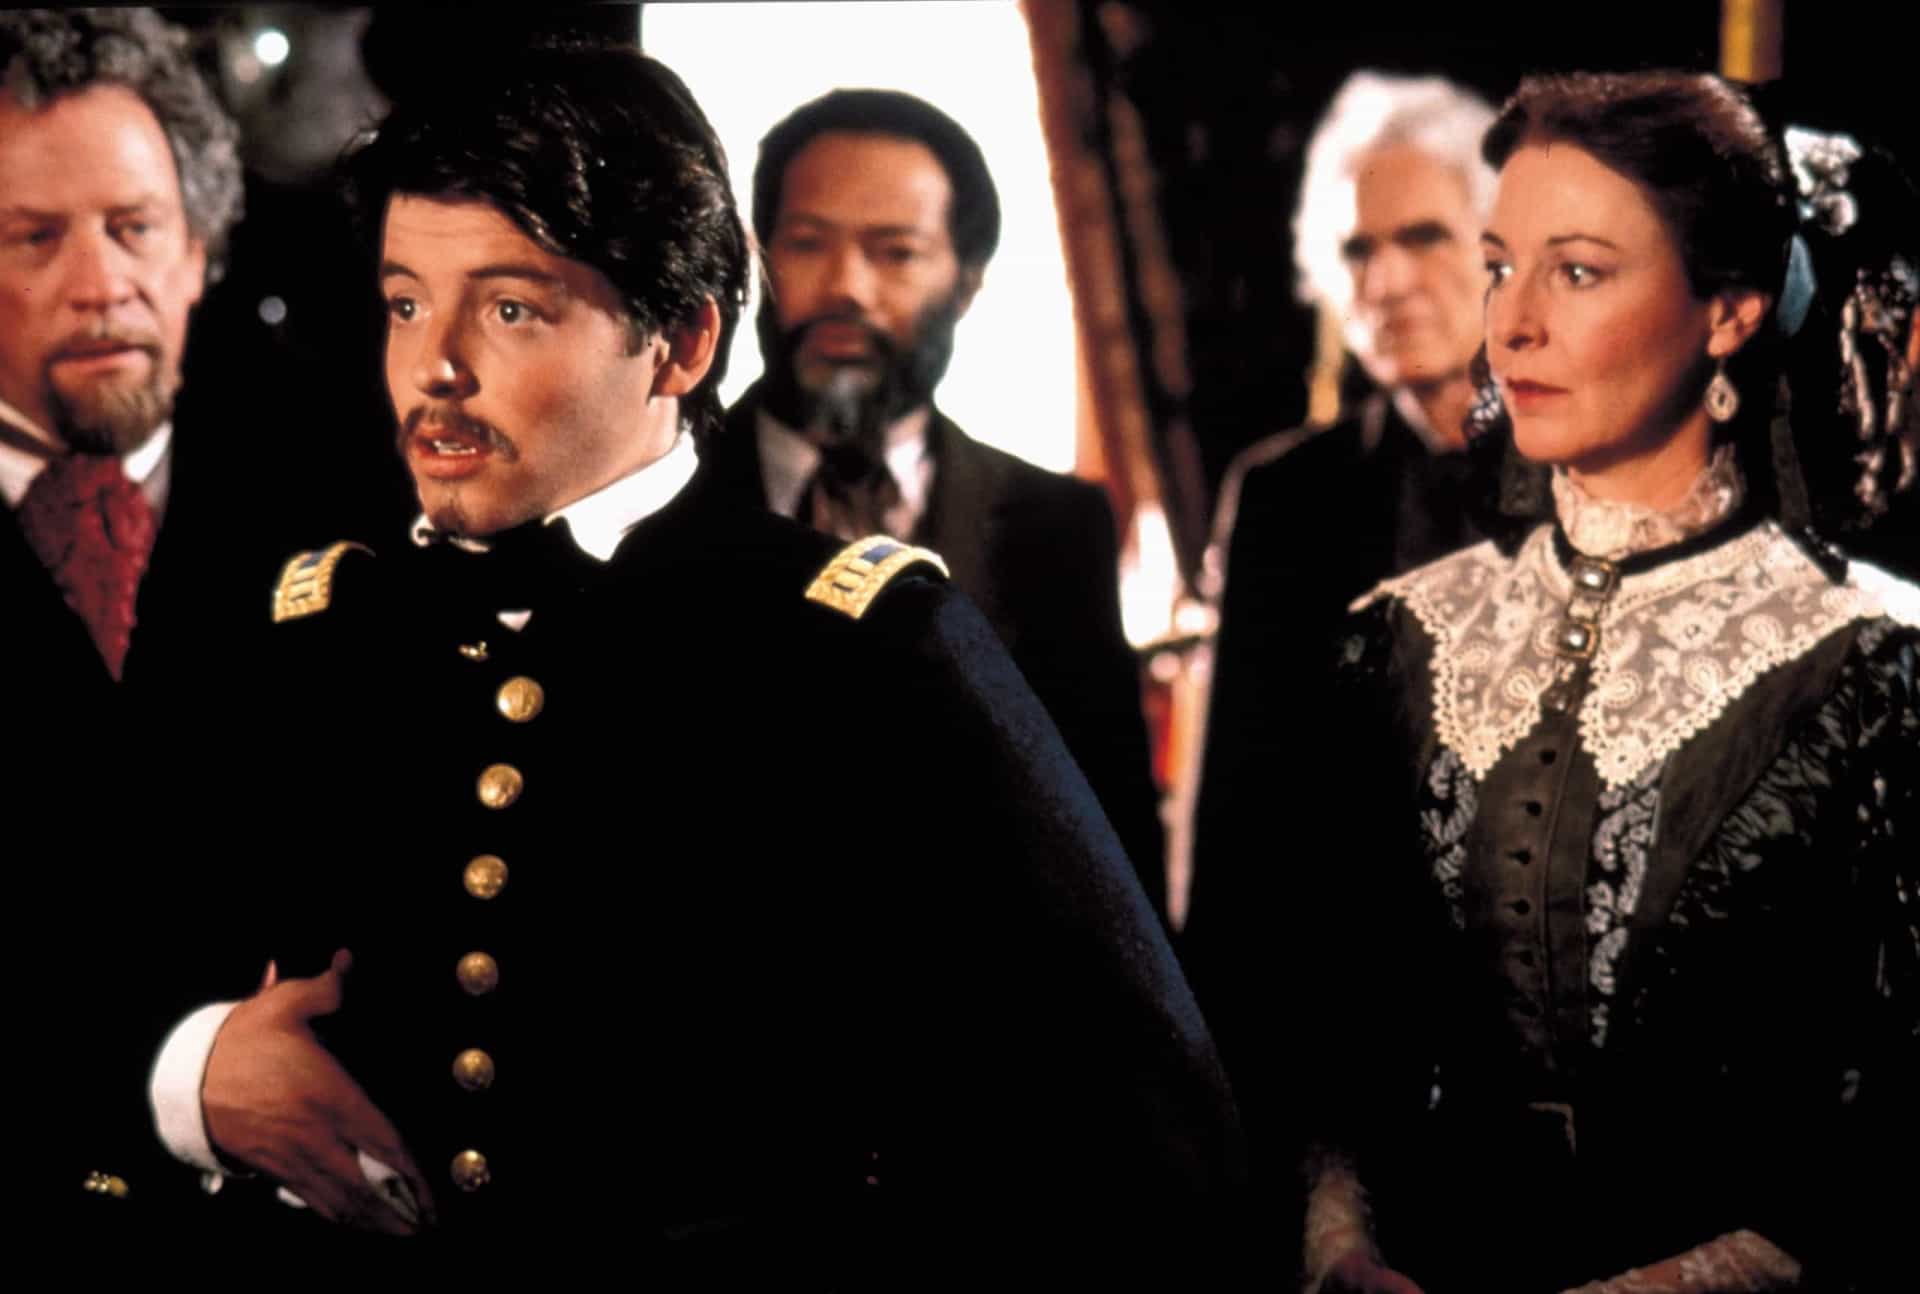 <p>Edward Zwick's movie, on the other hand, is a historical war drama about the first black regiment in the Civil War. 'Glory' (1989) stars Matthew Broderick, Denzel Washington, and Morgan Freeman.</p>